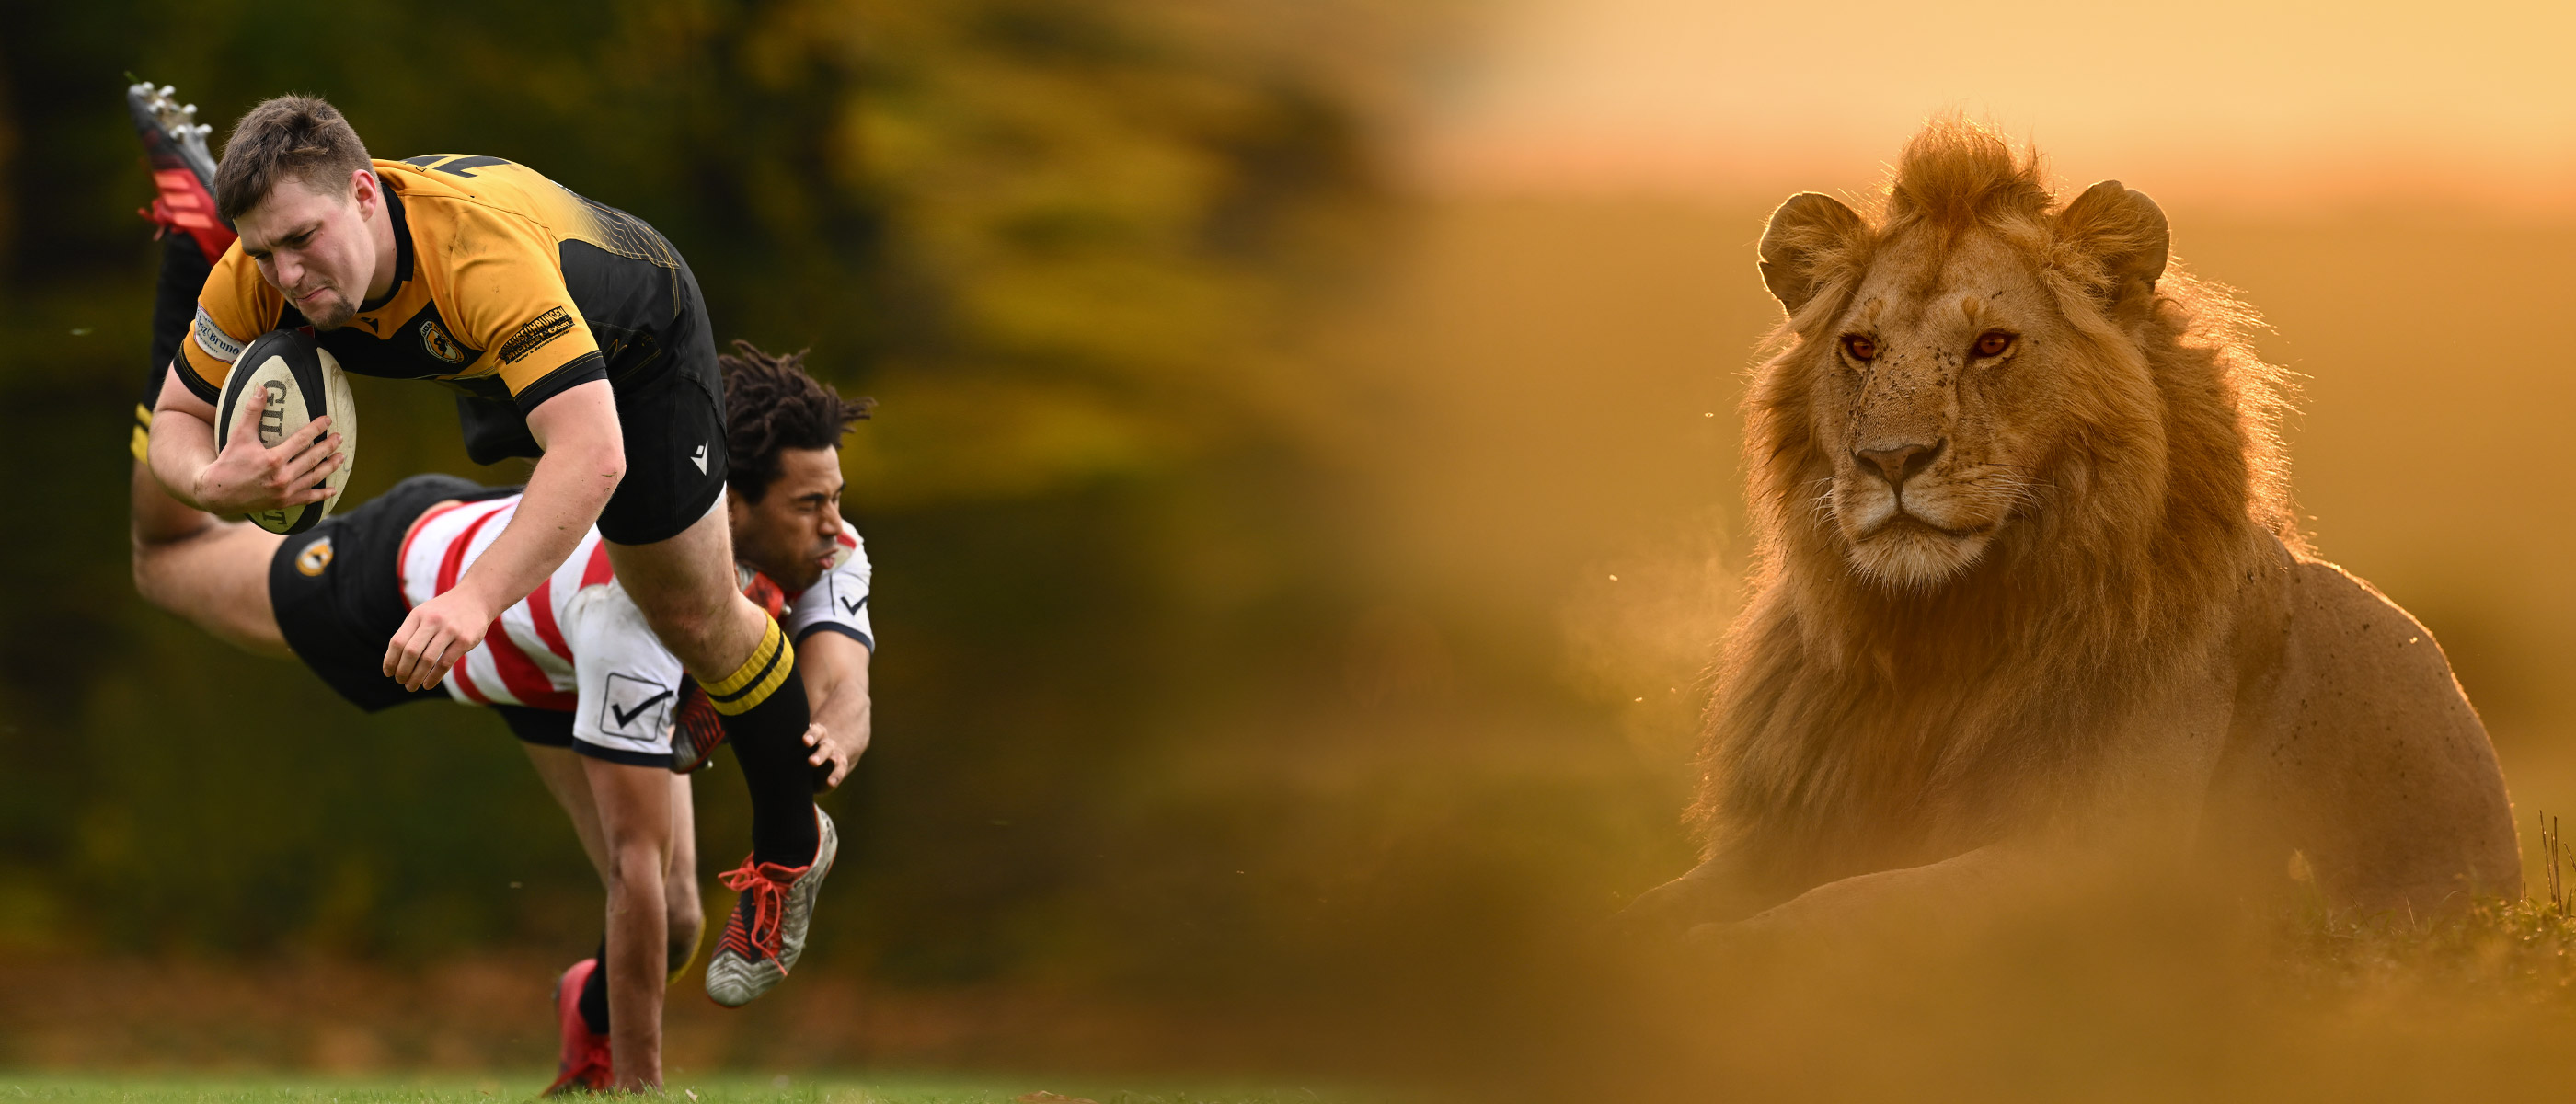 photo of rugby players and a lion taken with the NIKKOR Z 400mm f/2.8 TC VR S lens